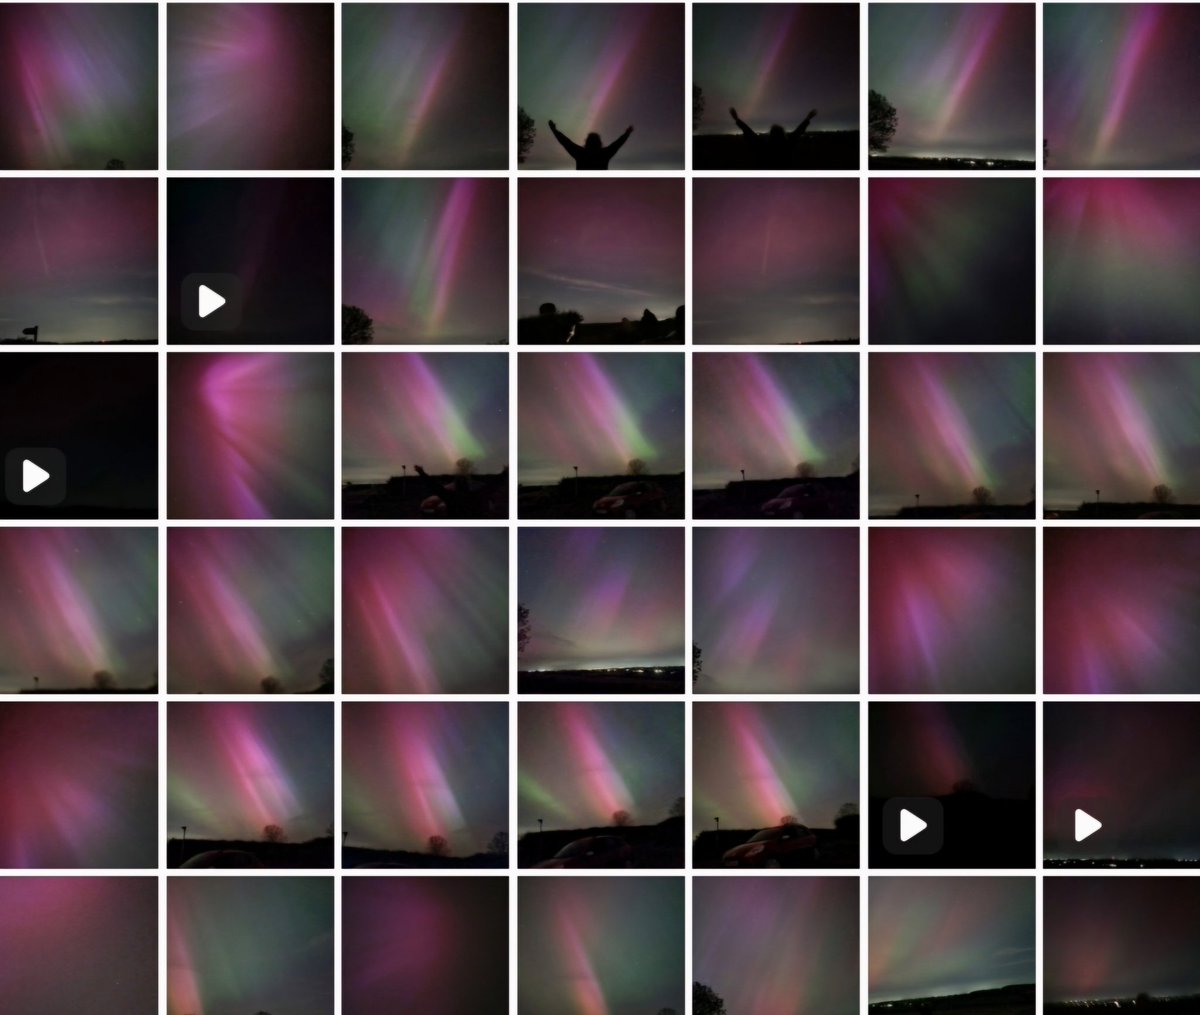 What a night! I took so many photos! These are just some of my phone pix of the beautiful #aurora displays tonight. Never seen skies like this from Bedfordshire before!! 10.05.24